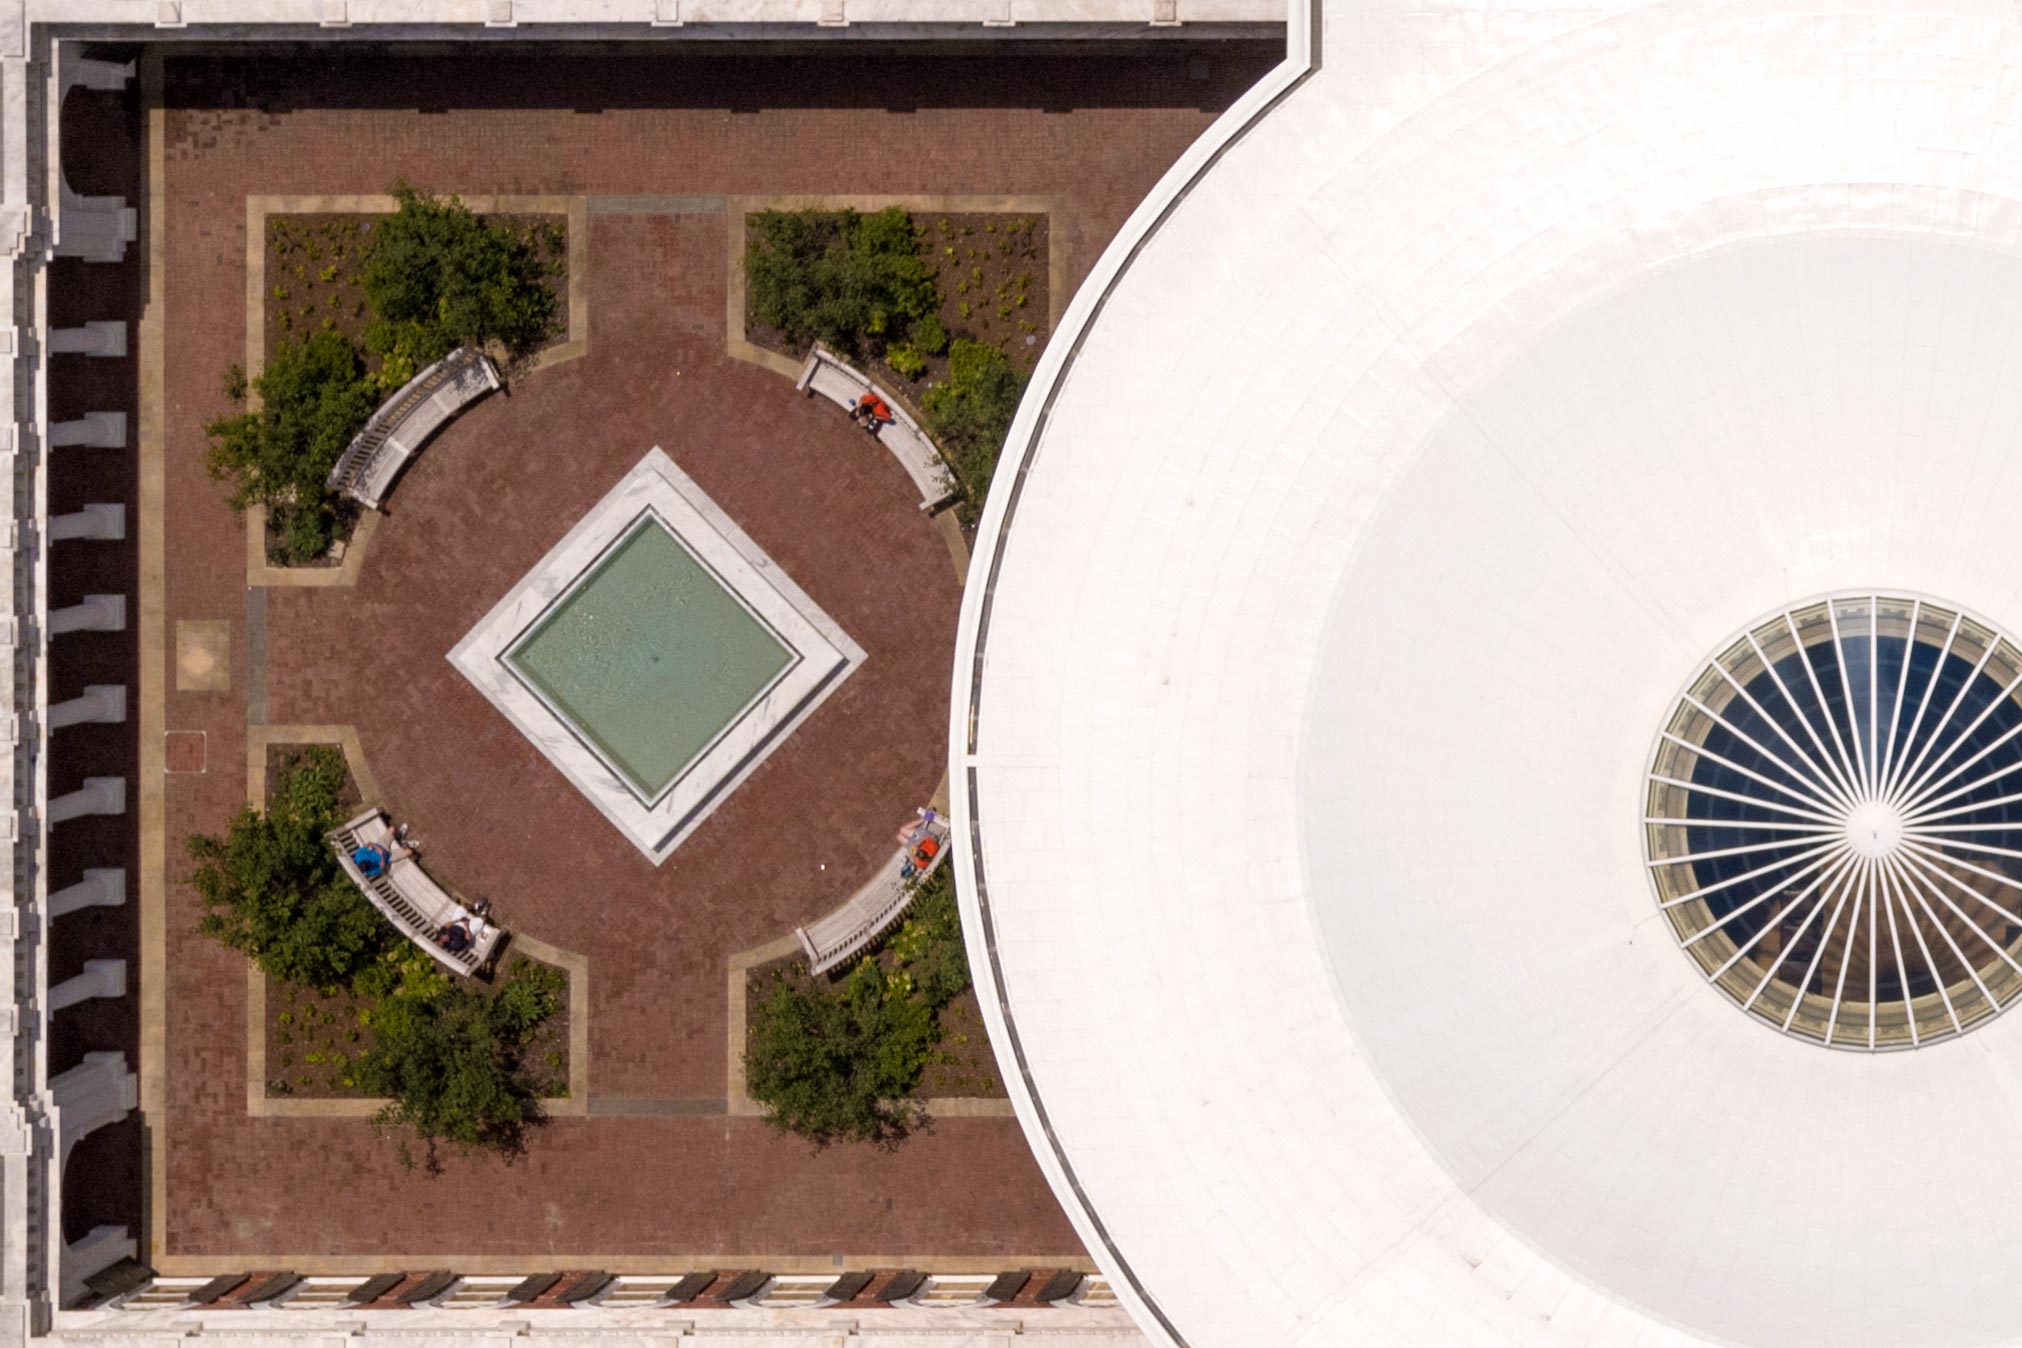 Aerial view of the Rotundas dome and one of its courtyards